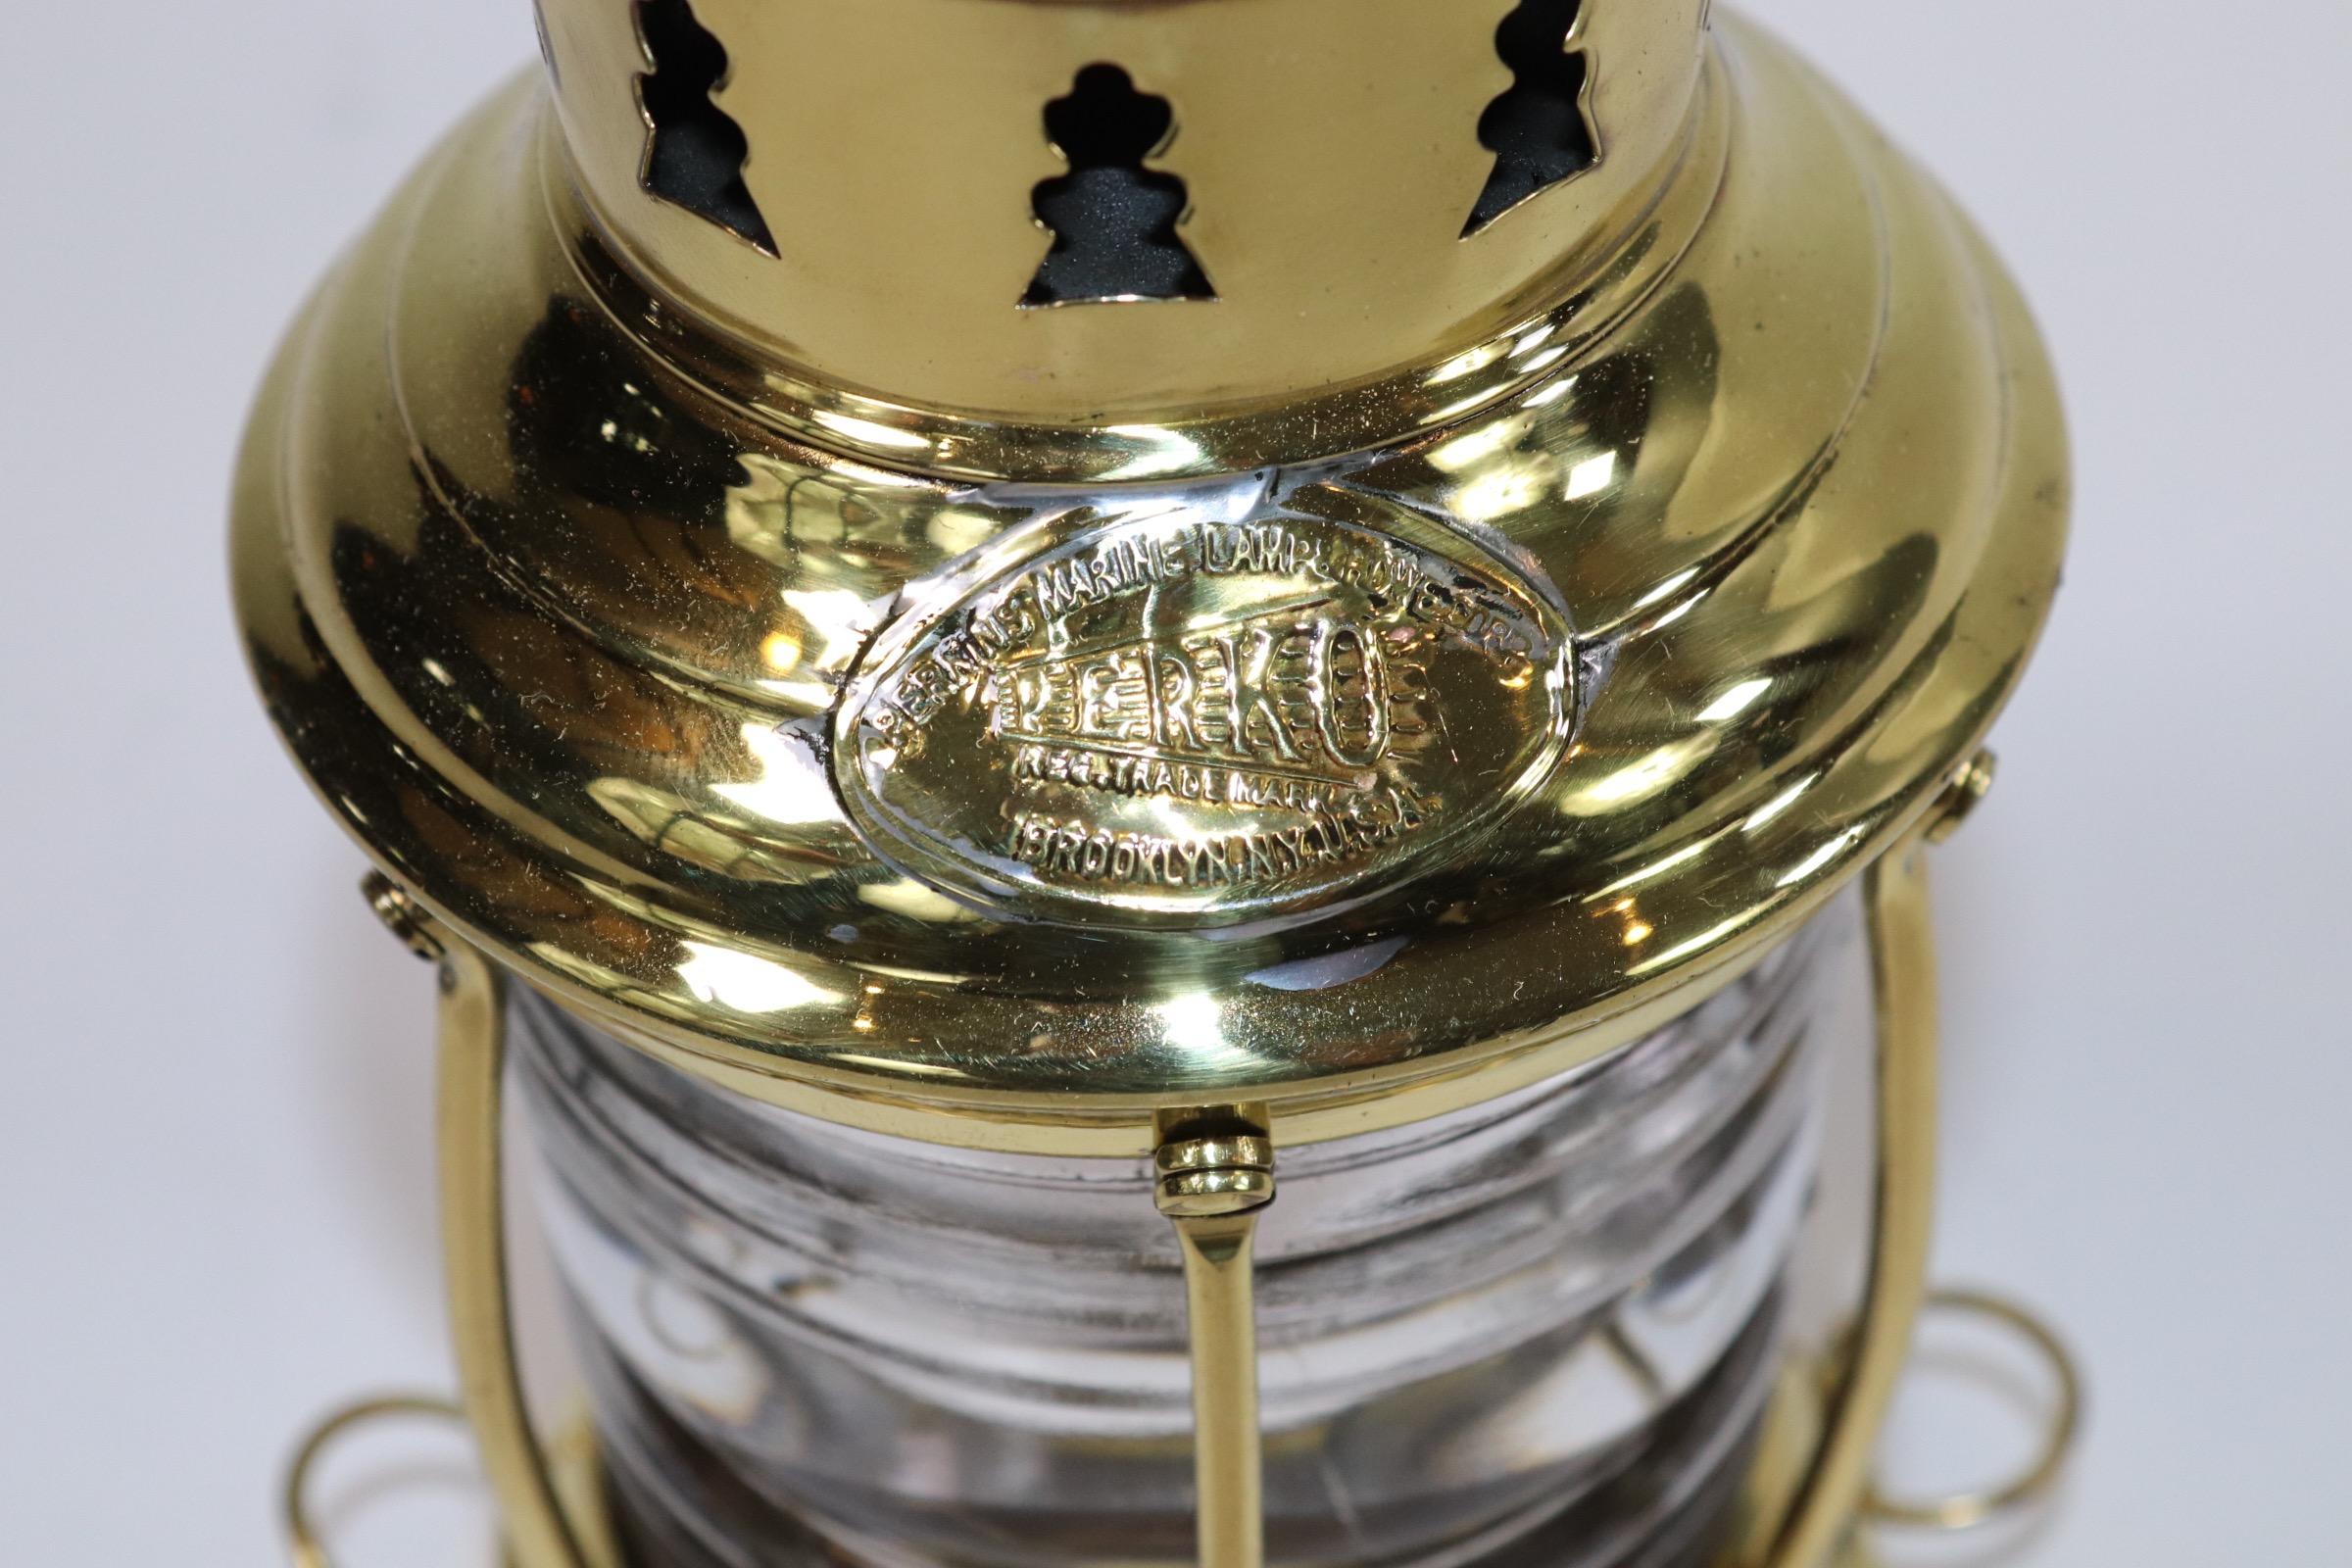 Polished and lacquered brass ships anchor lantern by Perko of Brooklyn. Fresnel glass lens with protective brass bars. With original burner. Weight is 2 pounds.